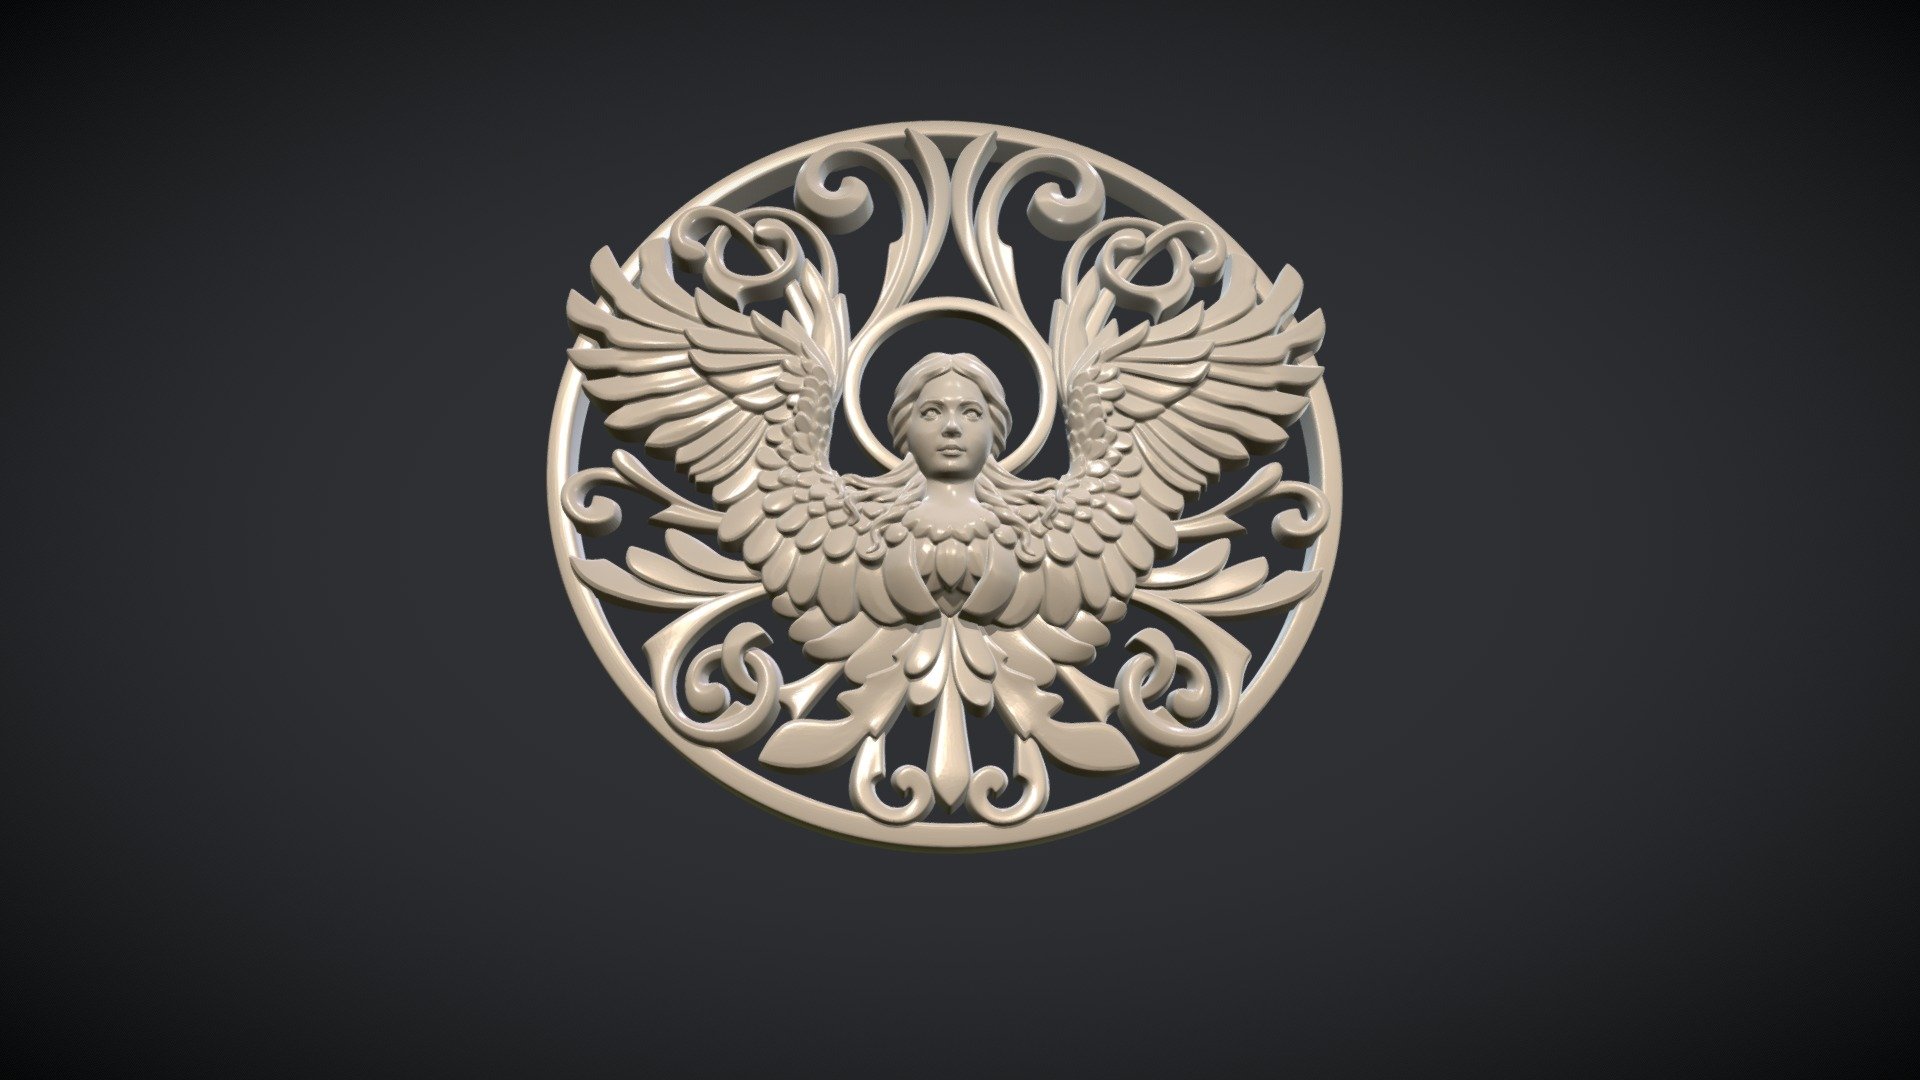 Angel relief with scroll work.

I think a pendant or a brooch or something else can be made out of this model.

Measure units are millimeters, it is about 4 cm in diameter.

Mesh is manifold, no holes, no bad contiguous edges.

The model consists of 457221 triangular faces and 228449 vertices.

Here is two version of the file:

1) Angel_II.(.blend, .stl, .obj, .fbx) contains the angel without circle.

2) Angel_II_crcl.(.blend, .stl, .obj, .fbx) contains the angel with circle.

Available formats: .blend, .stl, .obj, .fbx - Angel II - Buy Royalty Free 3D model by Skazok 3d model